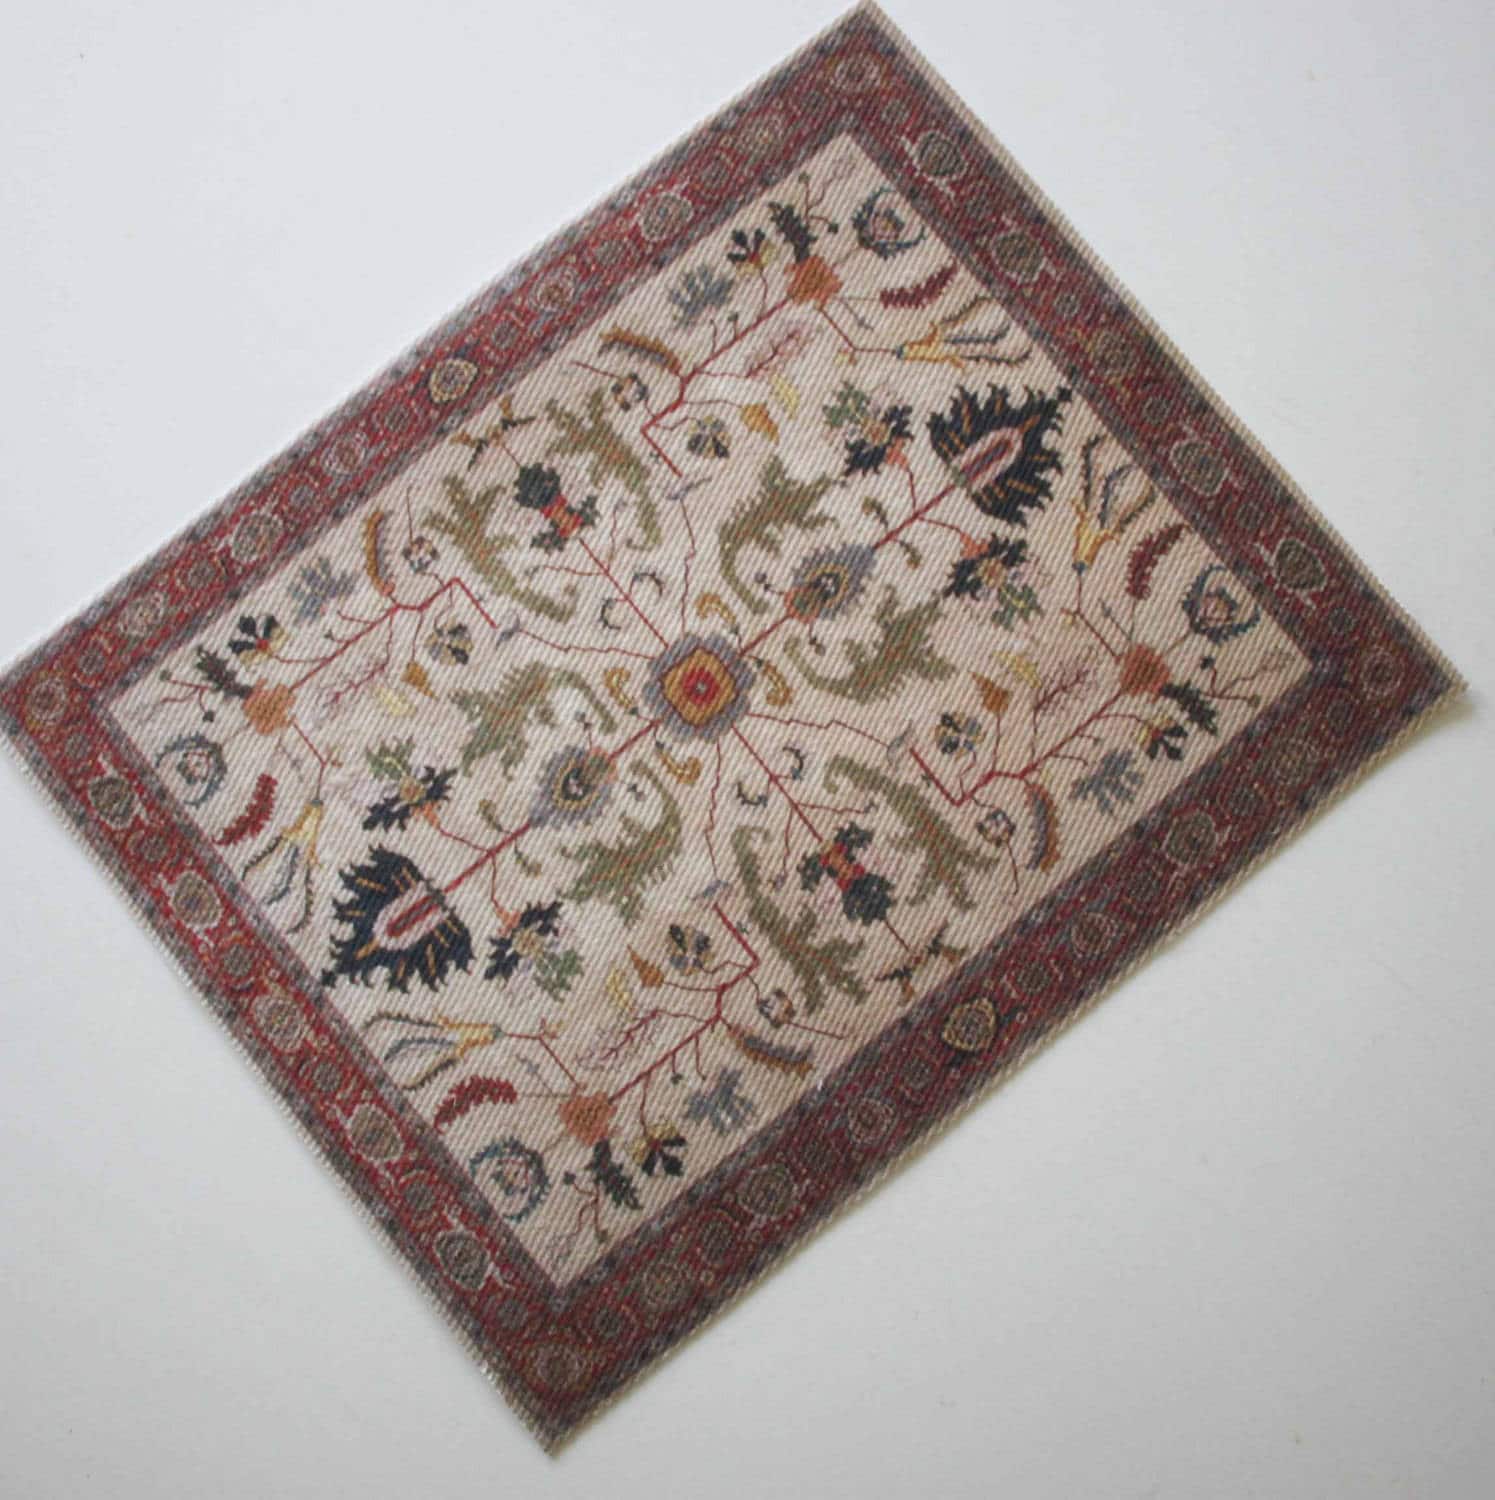 1:12 Scale Dollhouse Area Rug 0002058 approximately 5" x 7-1/2" 